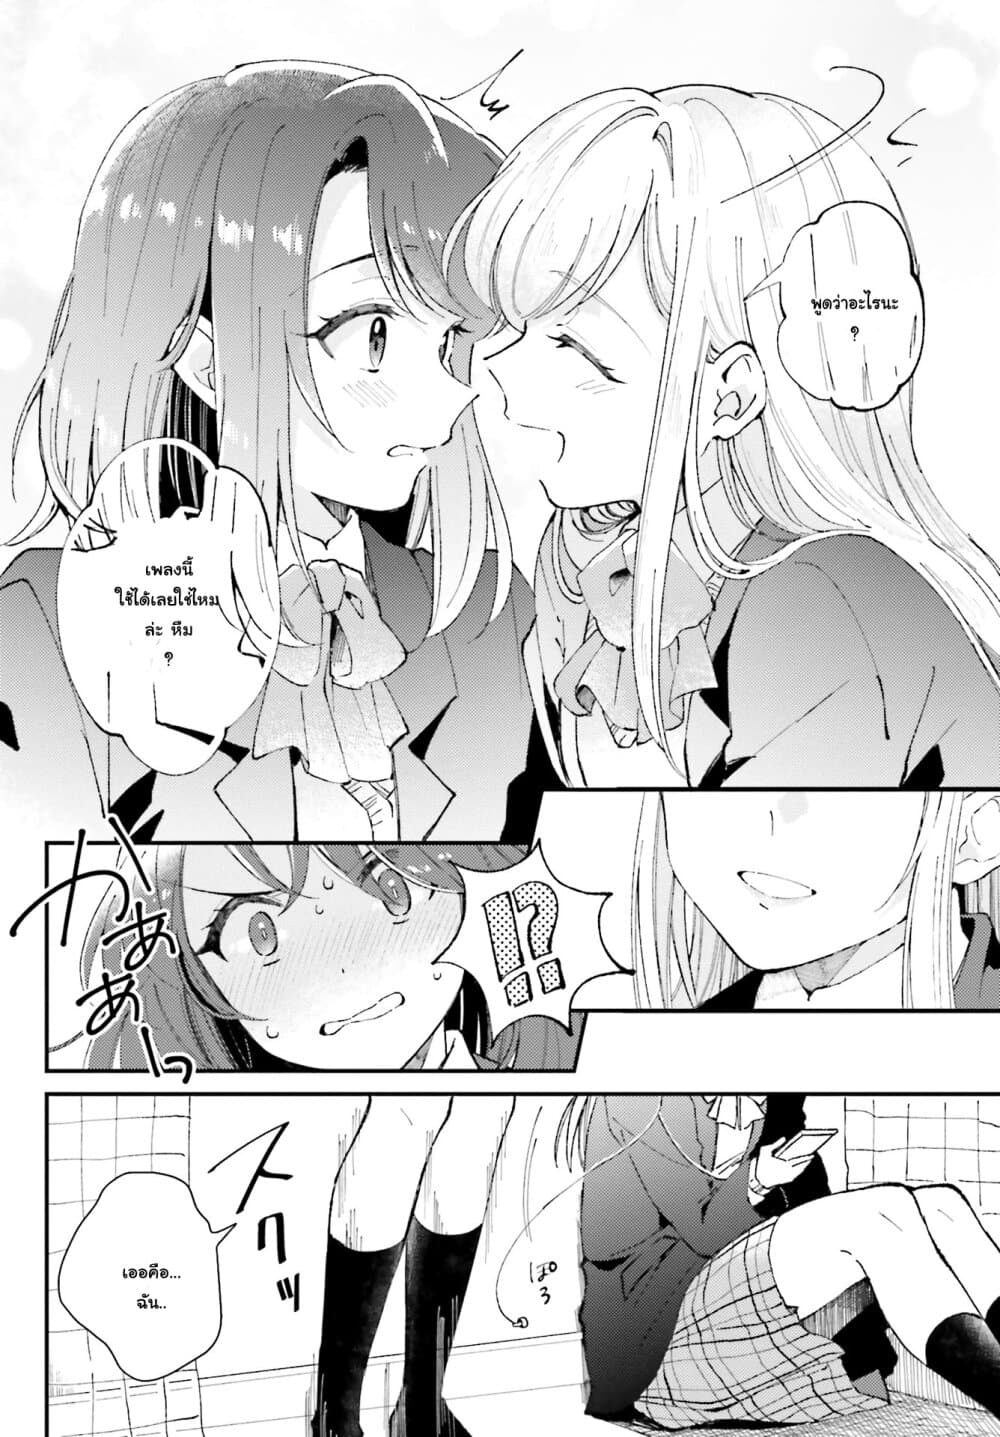 Adachi-to-Shimamura-Official-Comic-Anthology-Chapter2-8.jpg